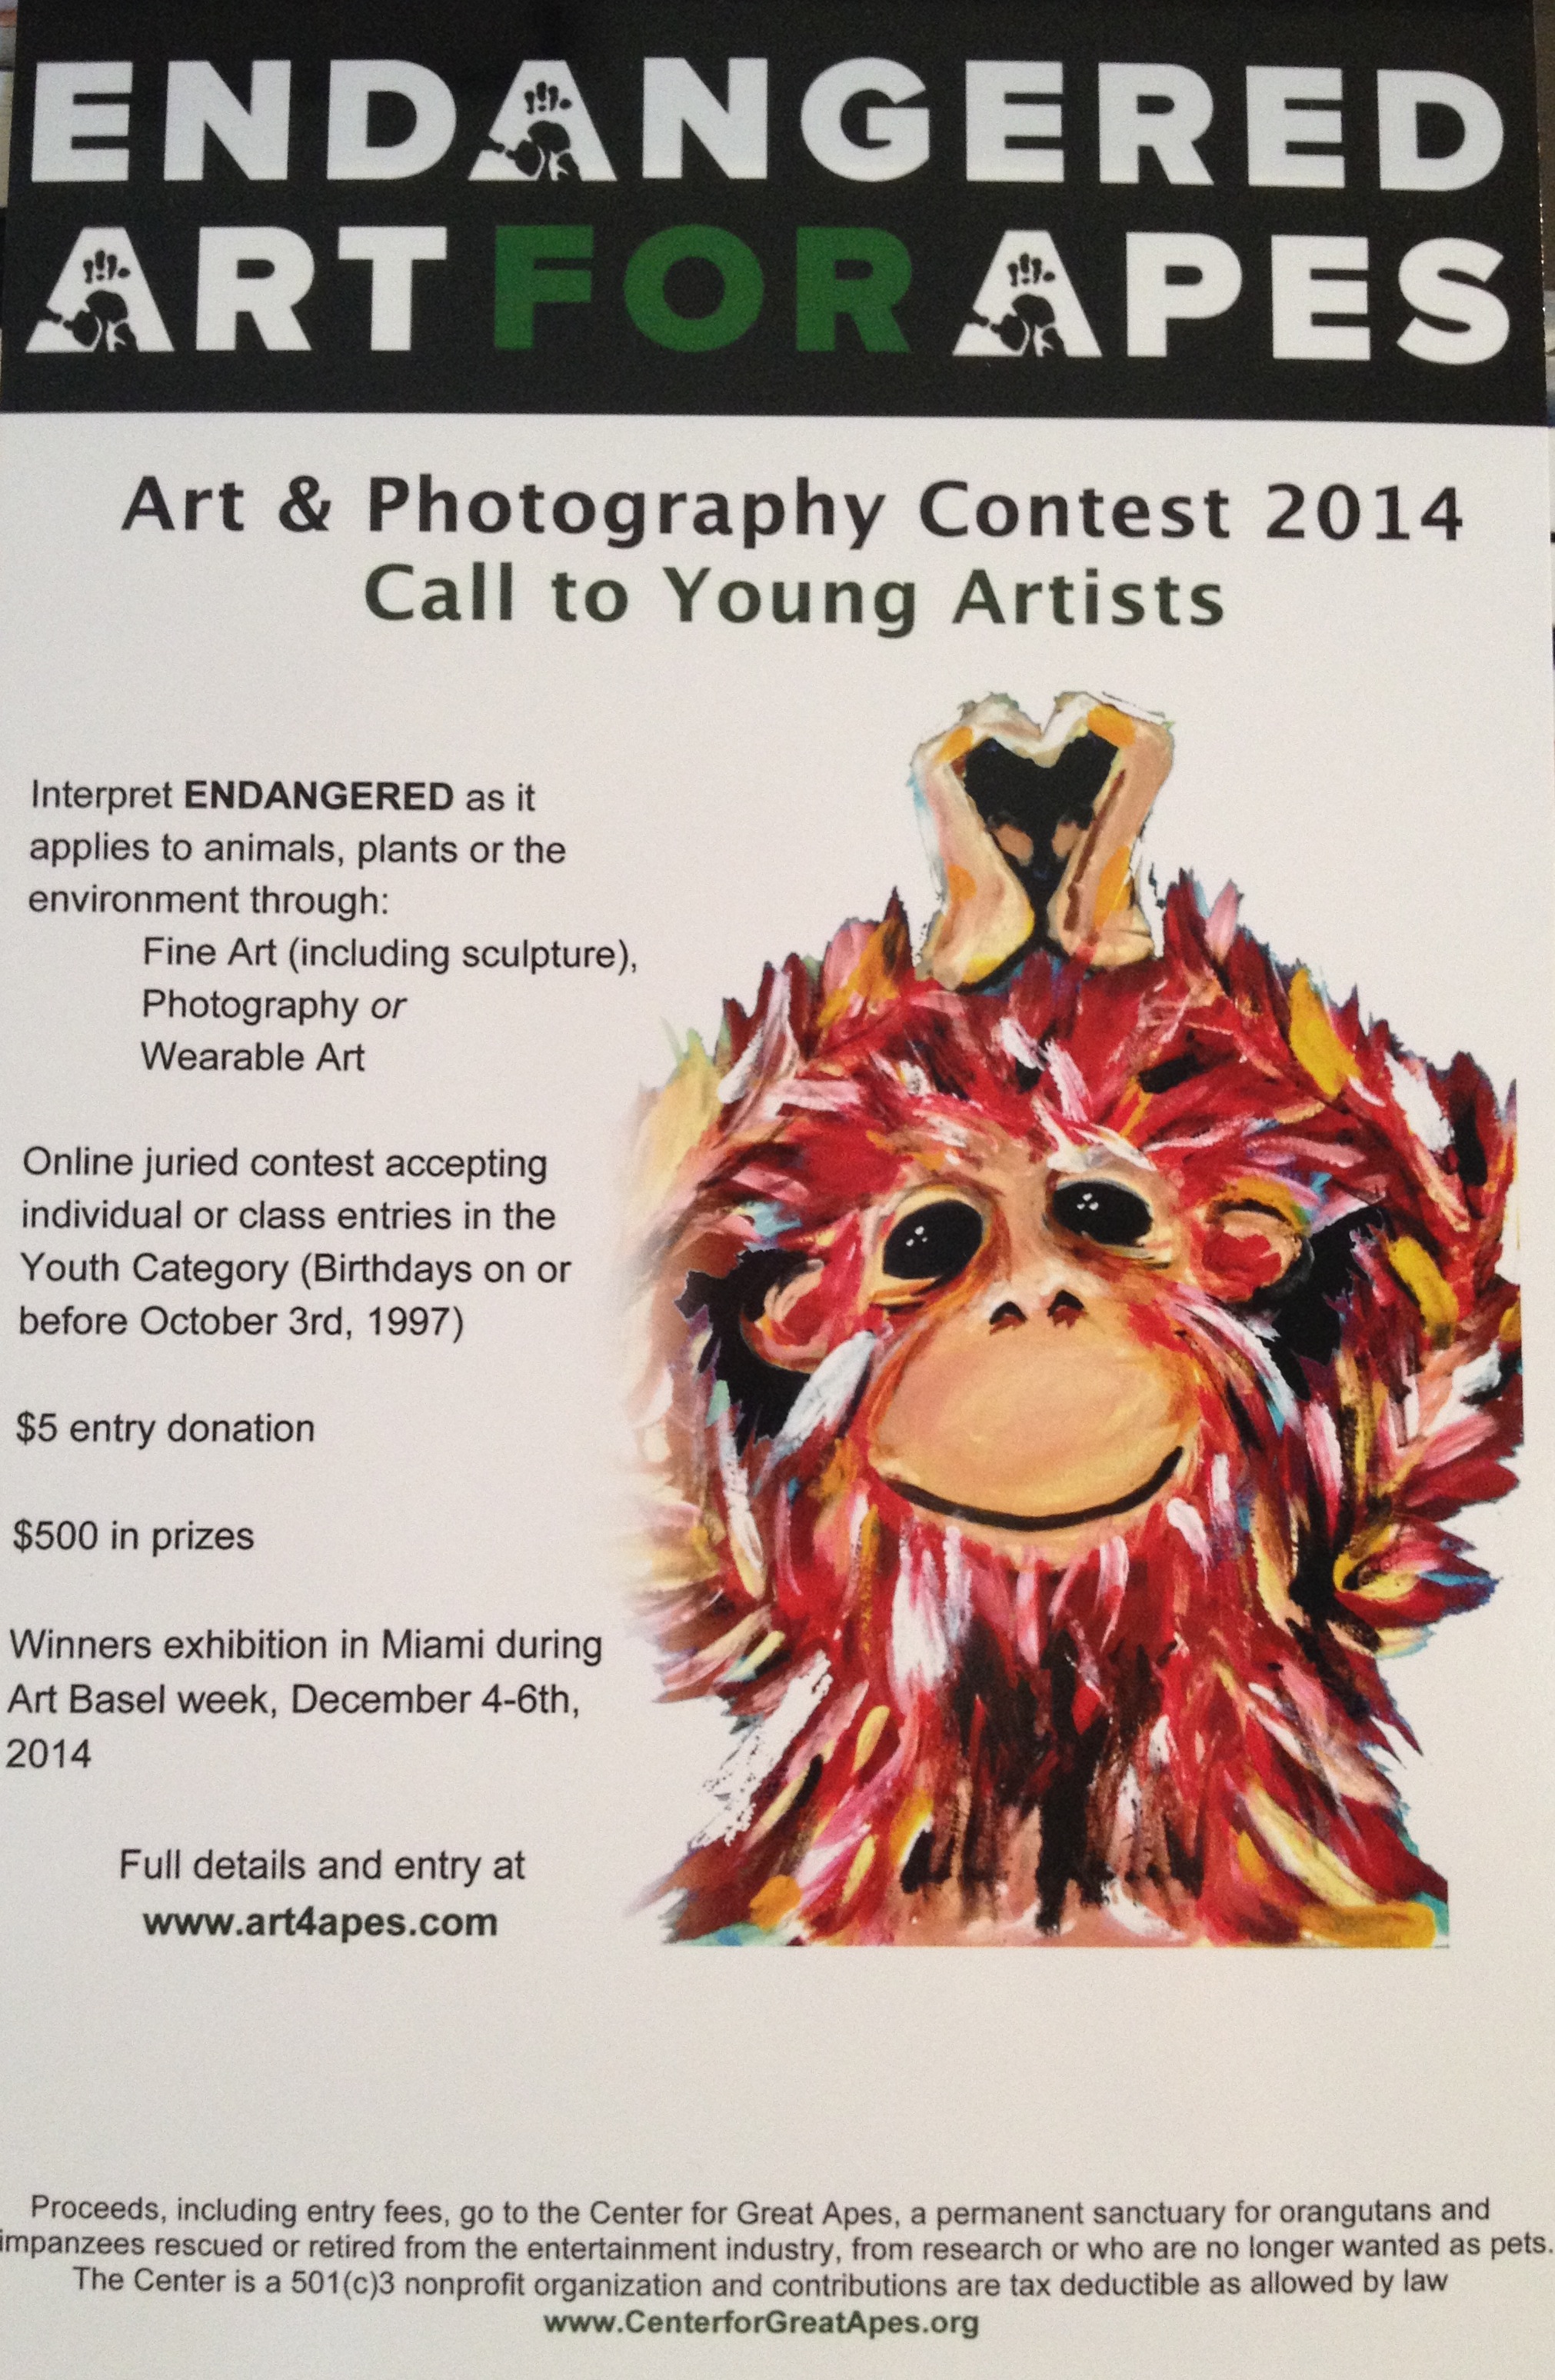 Call for Student entries